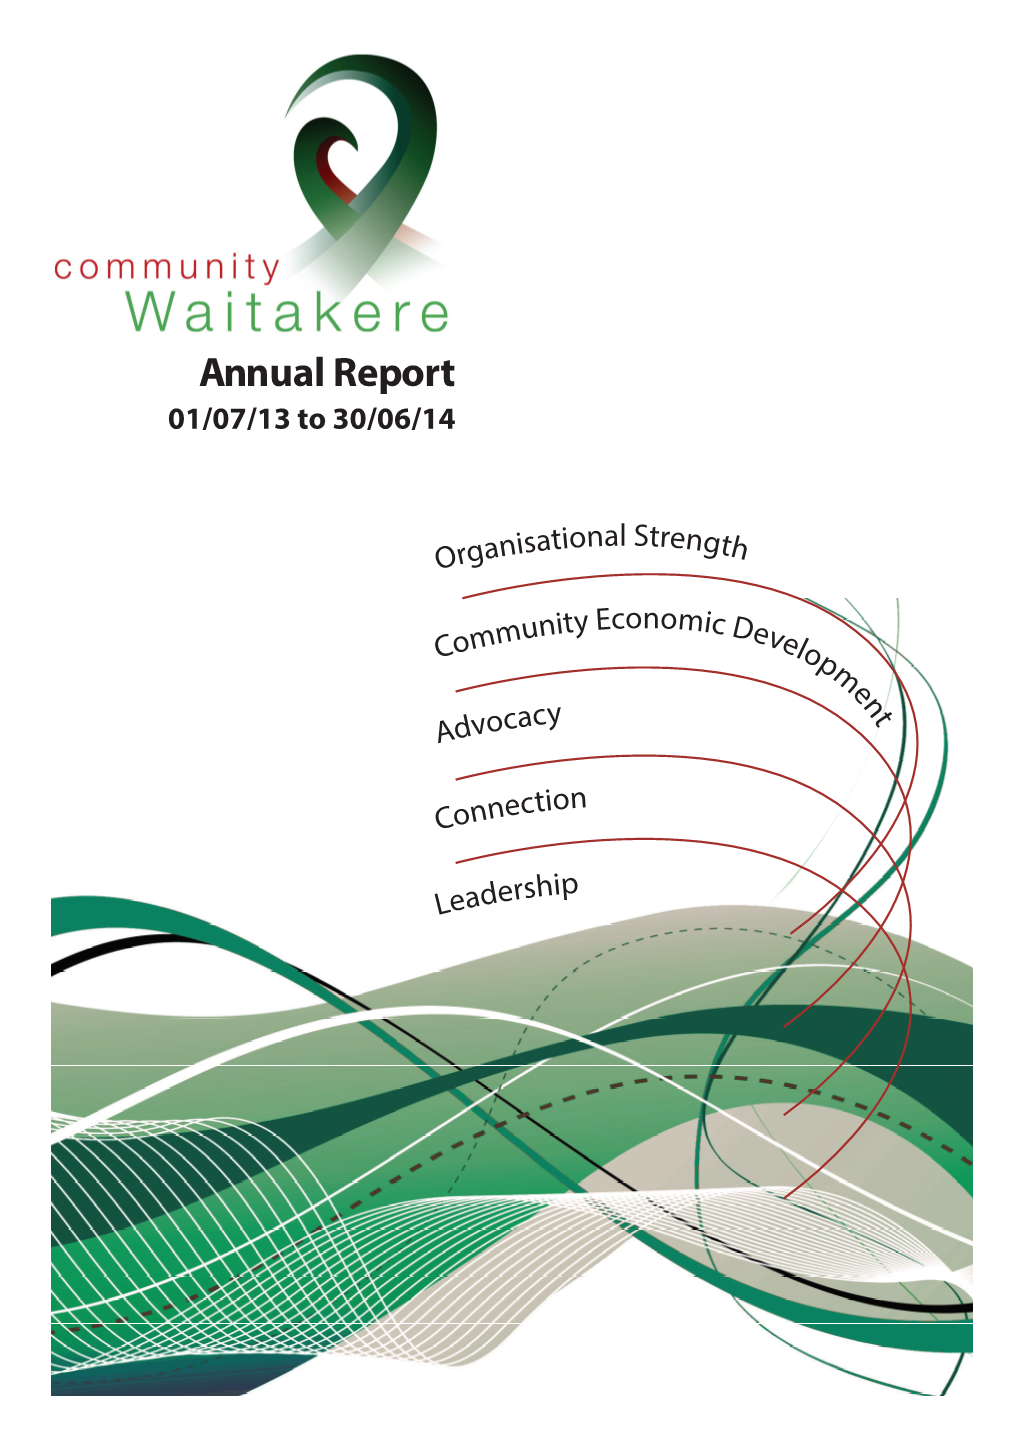 Annual Report 01/07/13 to 30/06/14